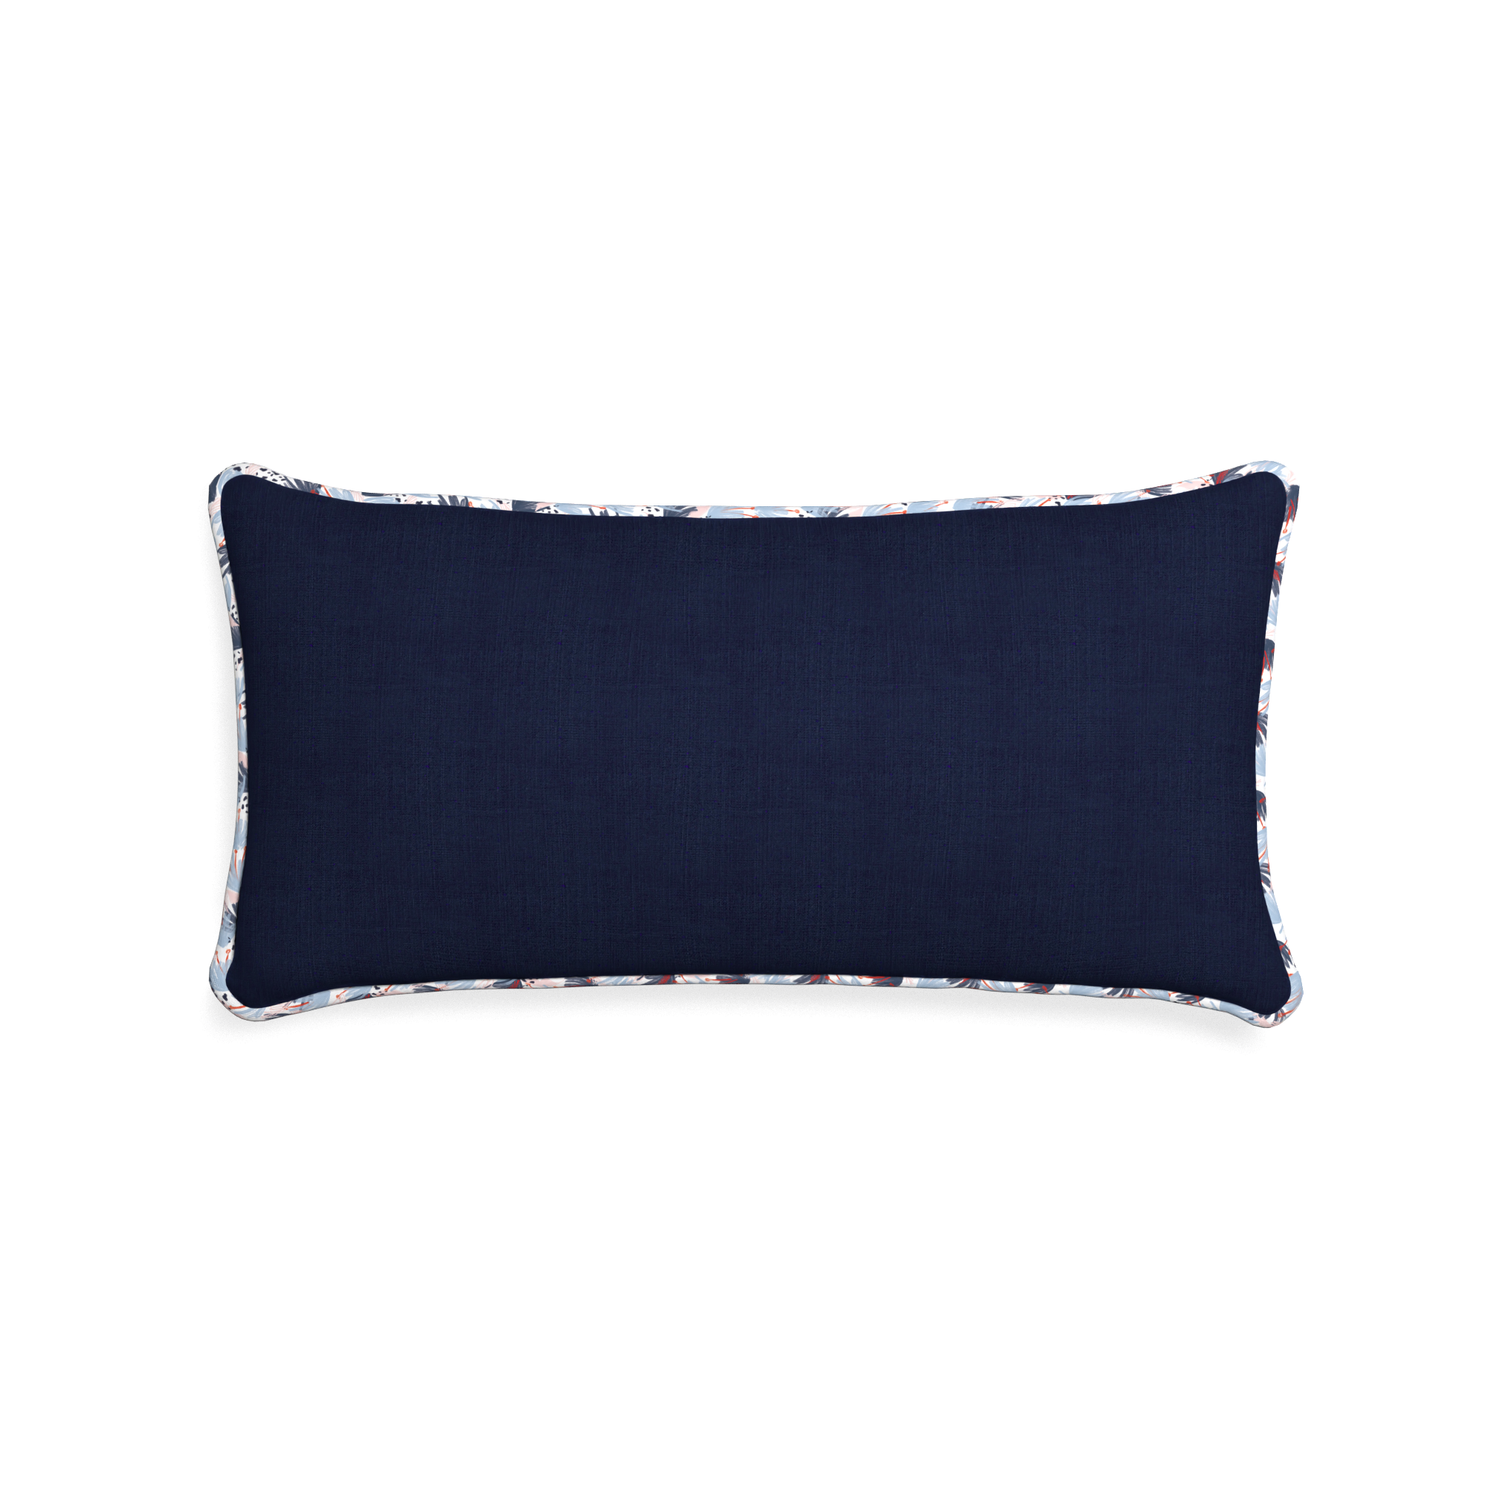 Midi-lumbar midnight custom navy bluepillow with e piping on white background